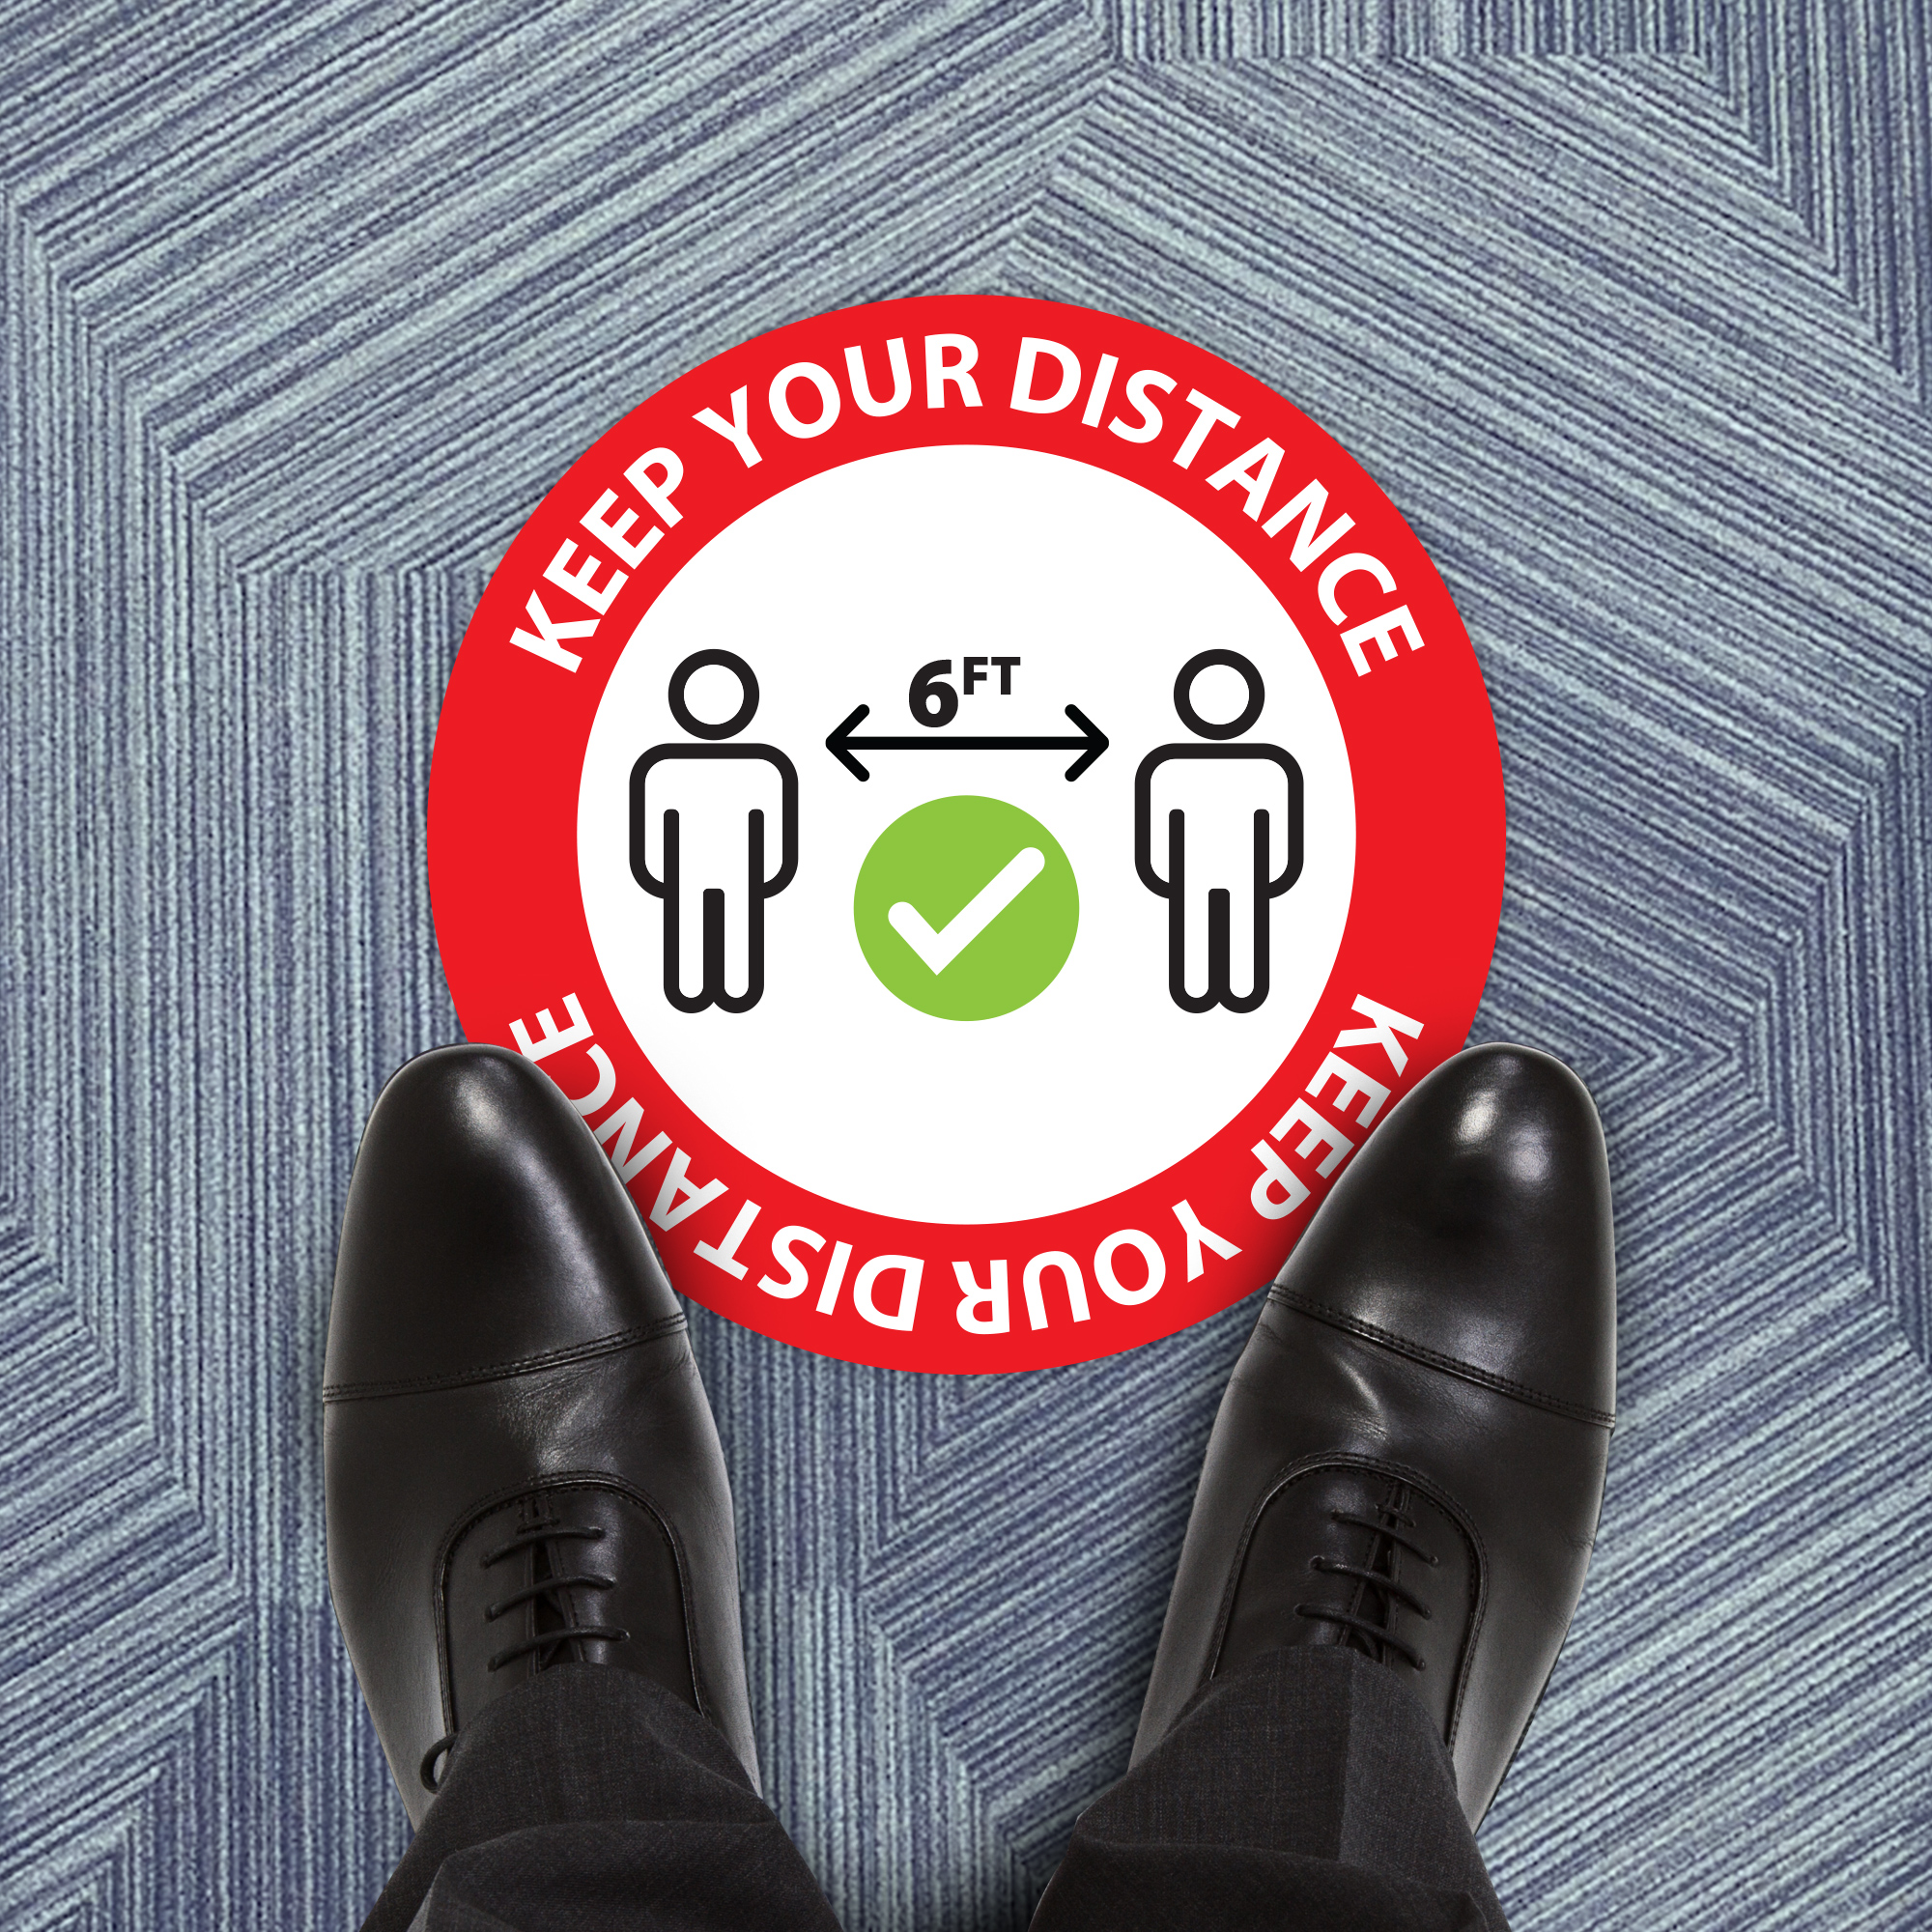 Keep Your Distance Floor Decal - 17 inch